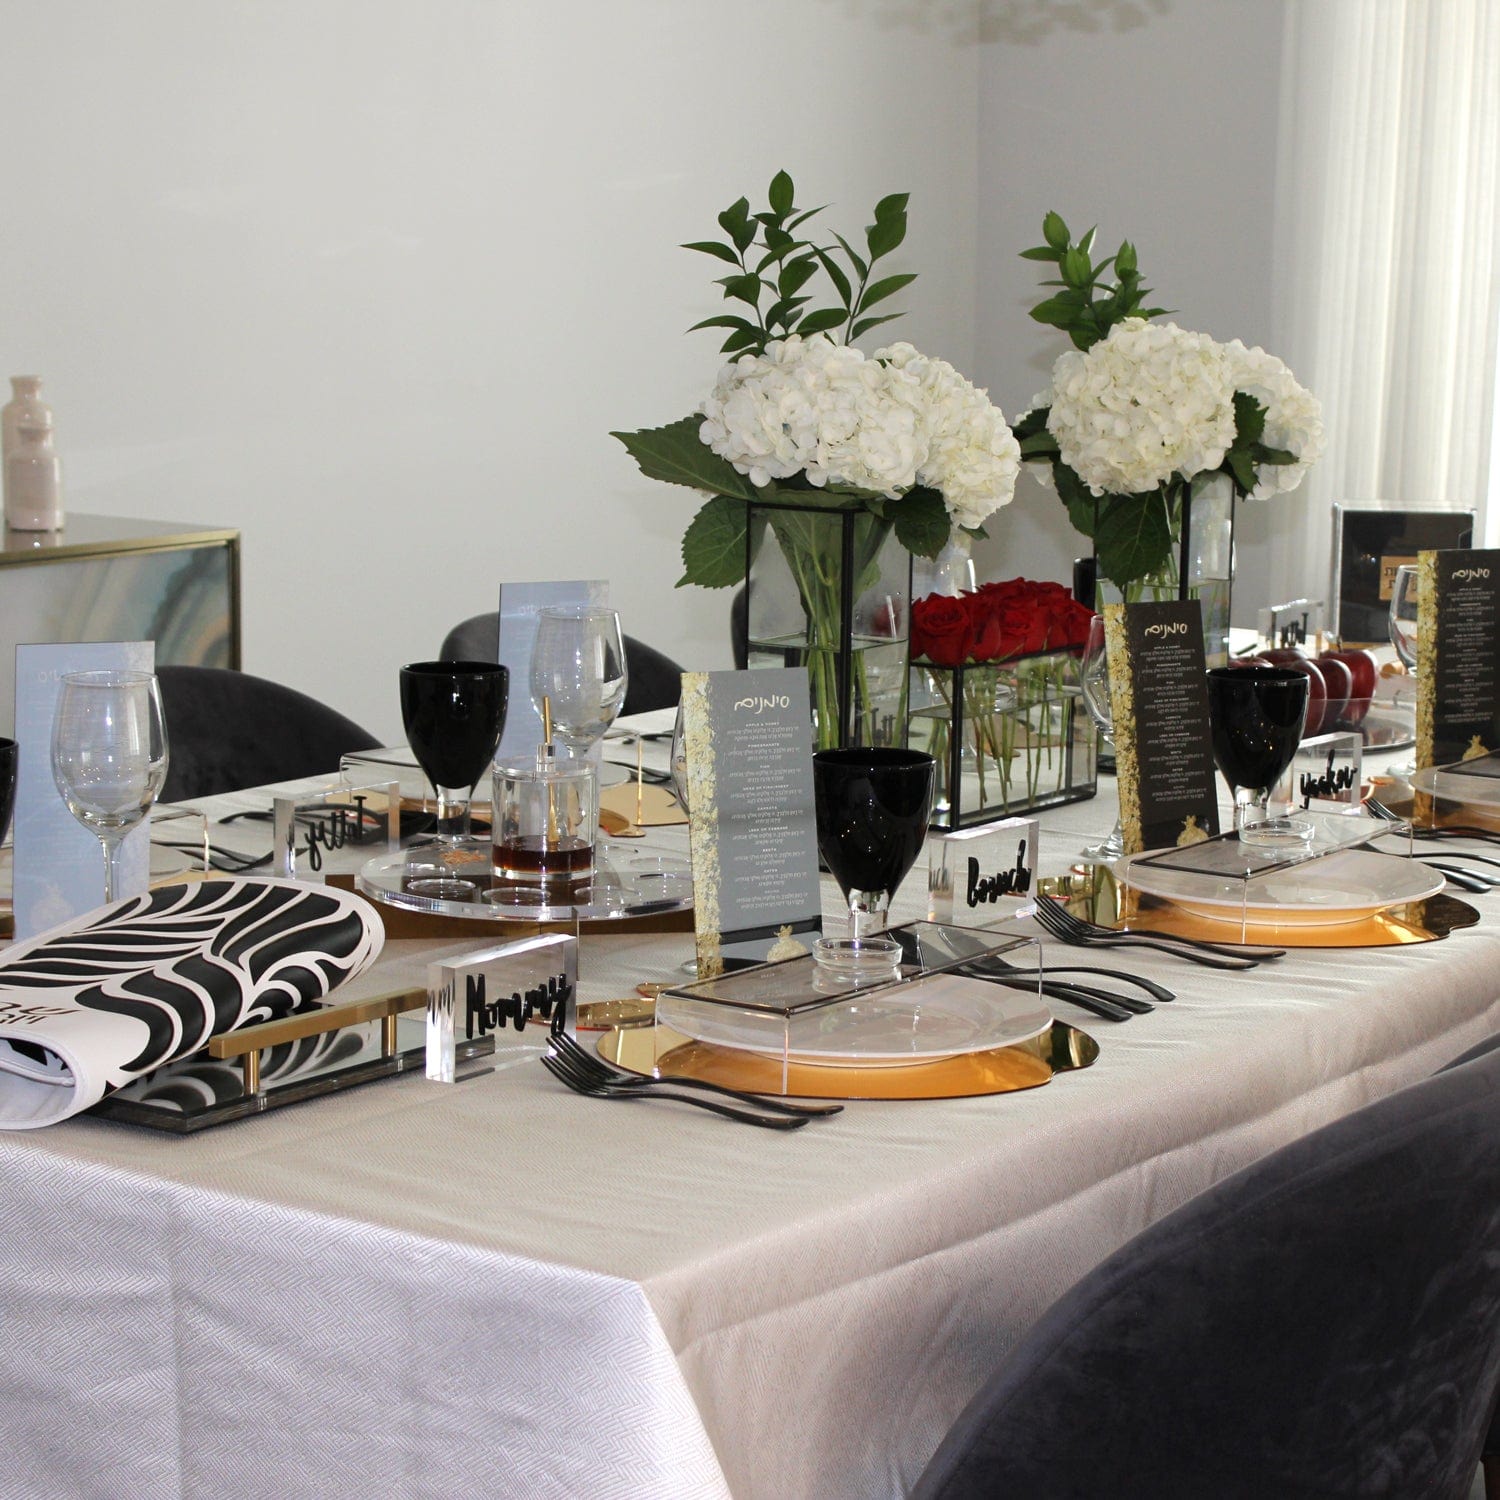 Black & Gold Rosh Hashanah Tablescape - Waterdale Collection